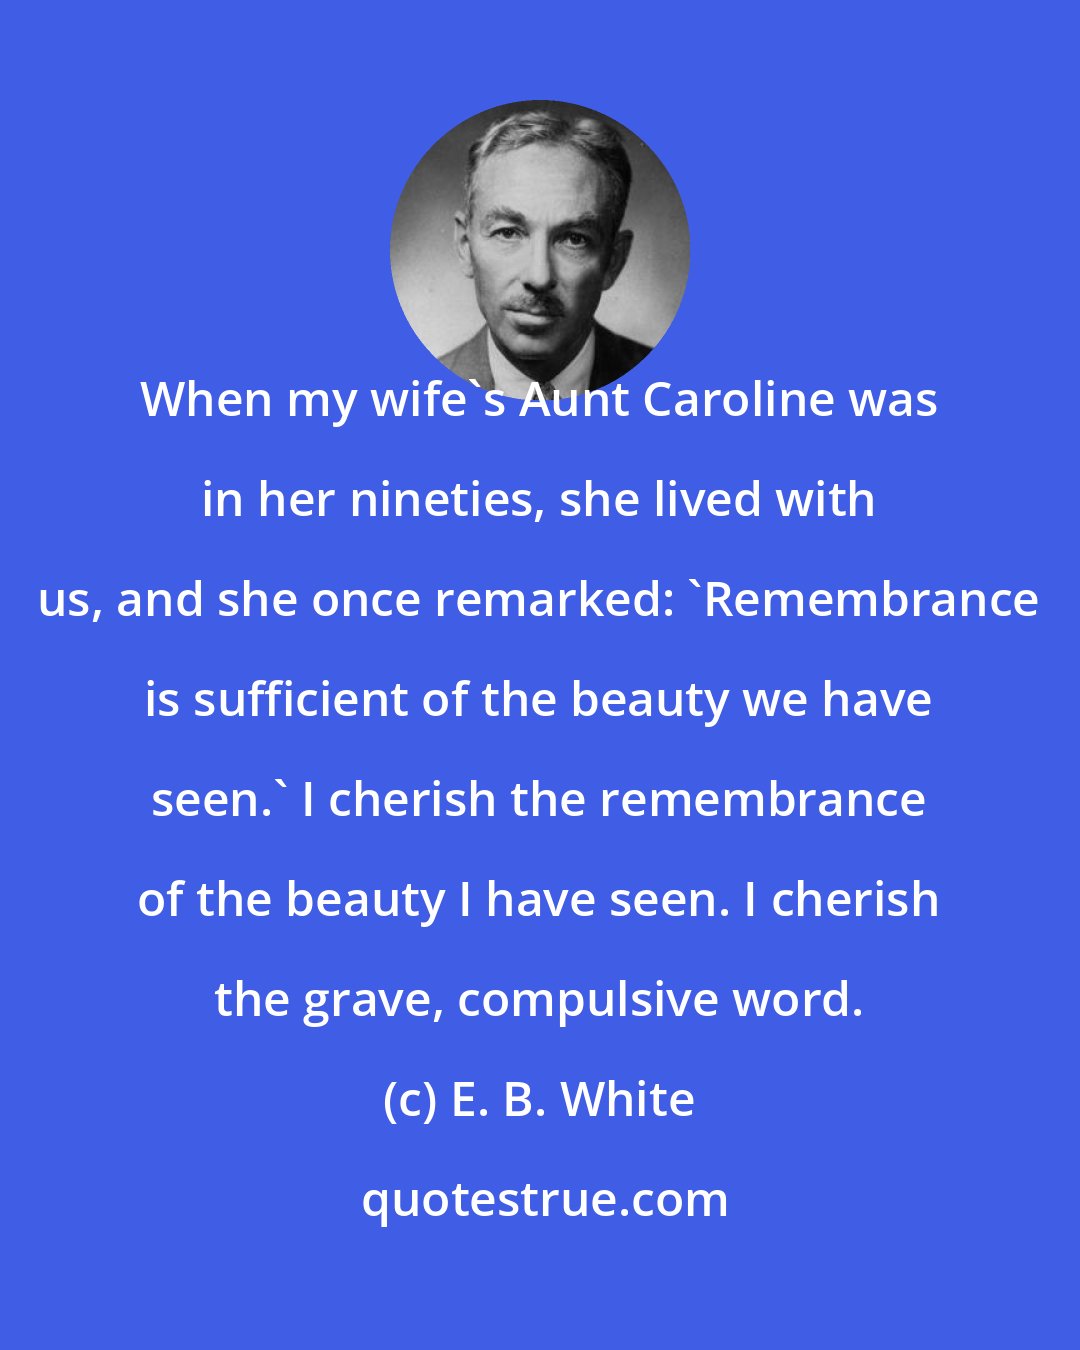 E. B. White: When my wife's Aunt Caroline was in her nineties, she lived with us, and she once remarked: 'Remembrance is sufficient of the beauty we have seen.' I cherish the remembrance of the beauty I have seen. I cherish the grave, compulsive word.